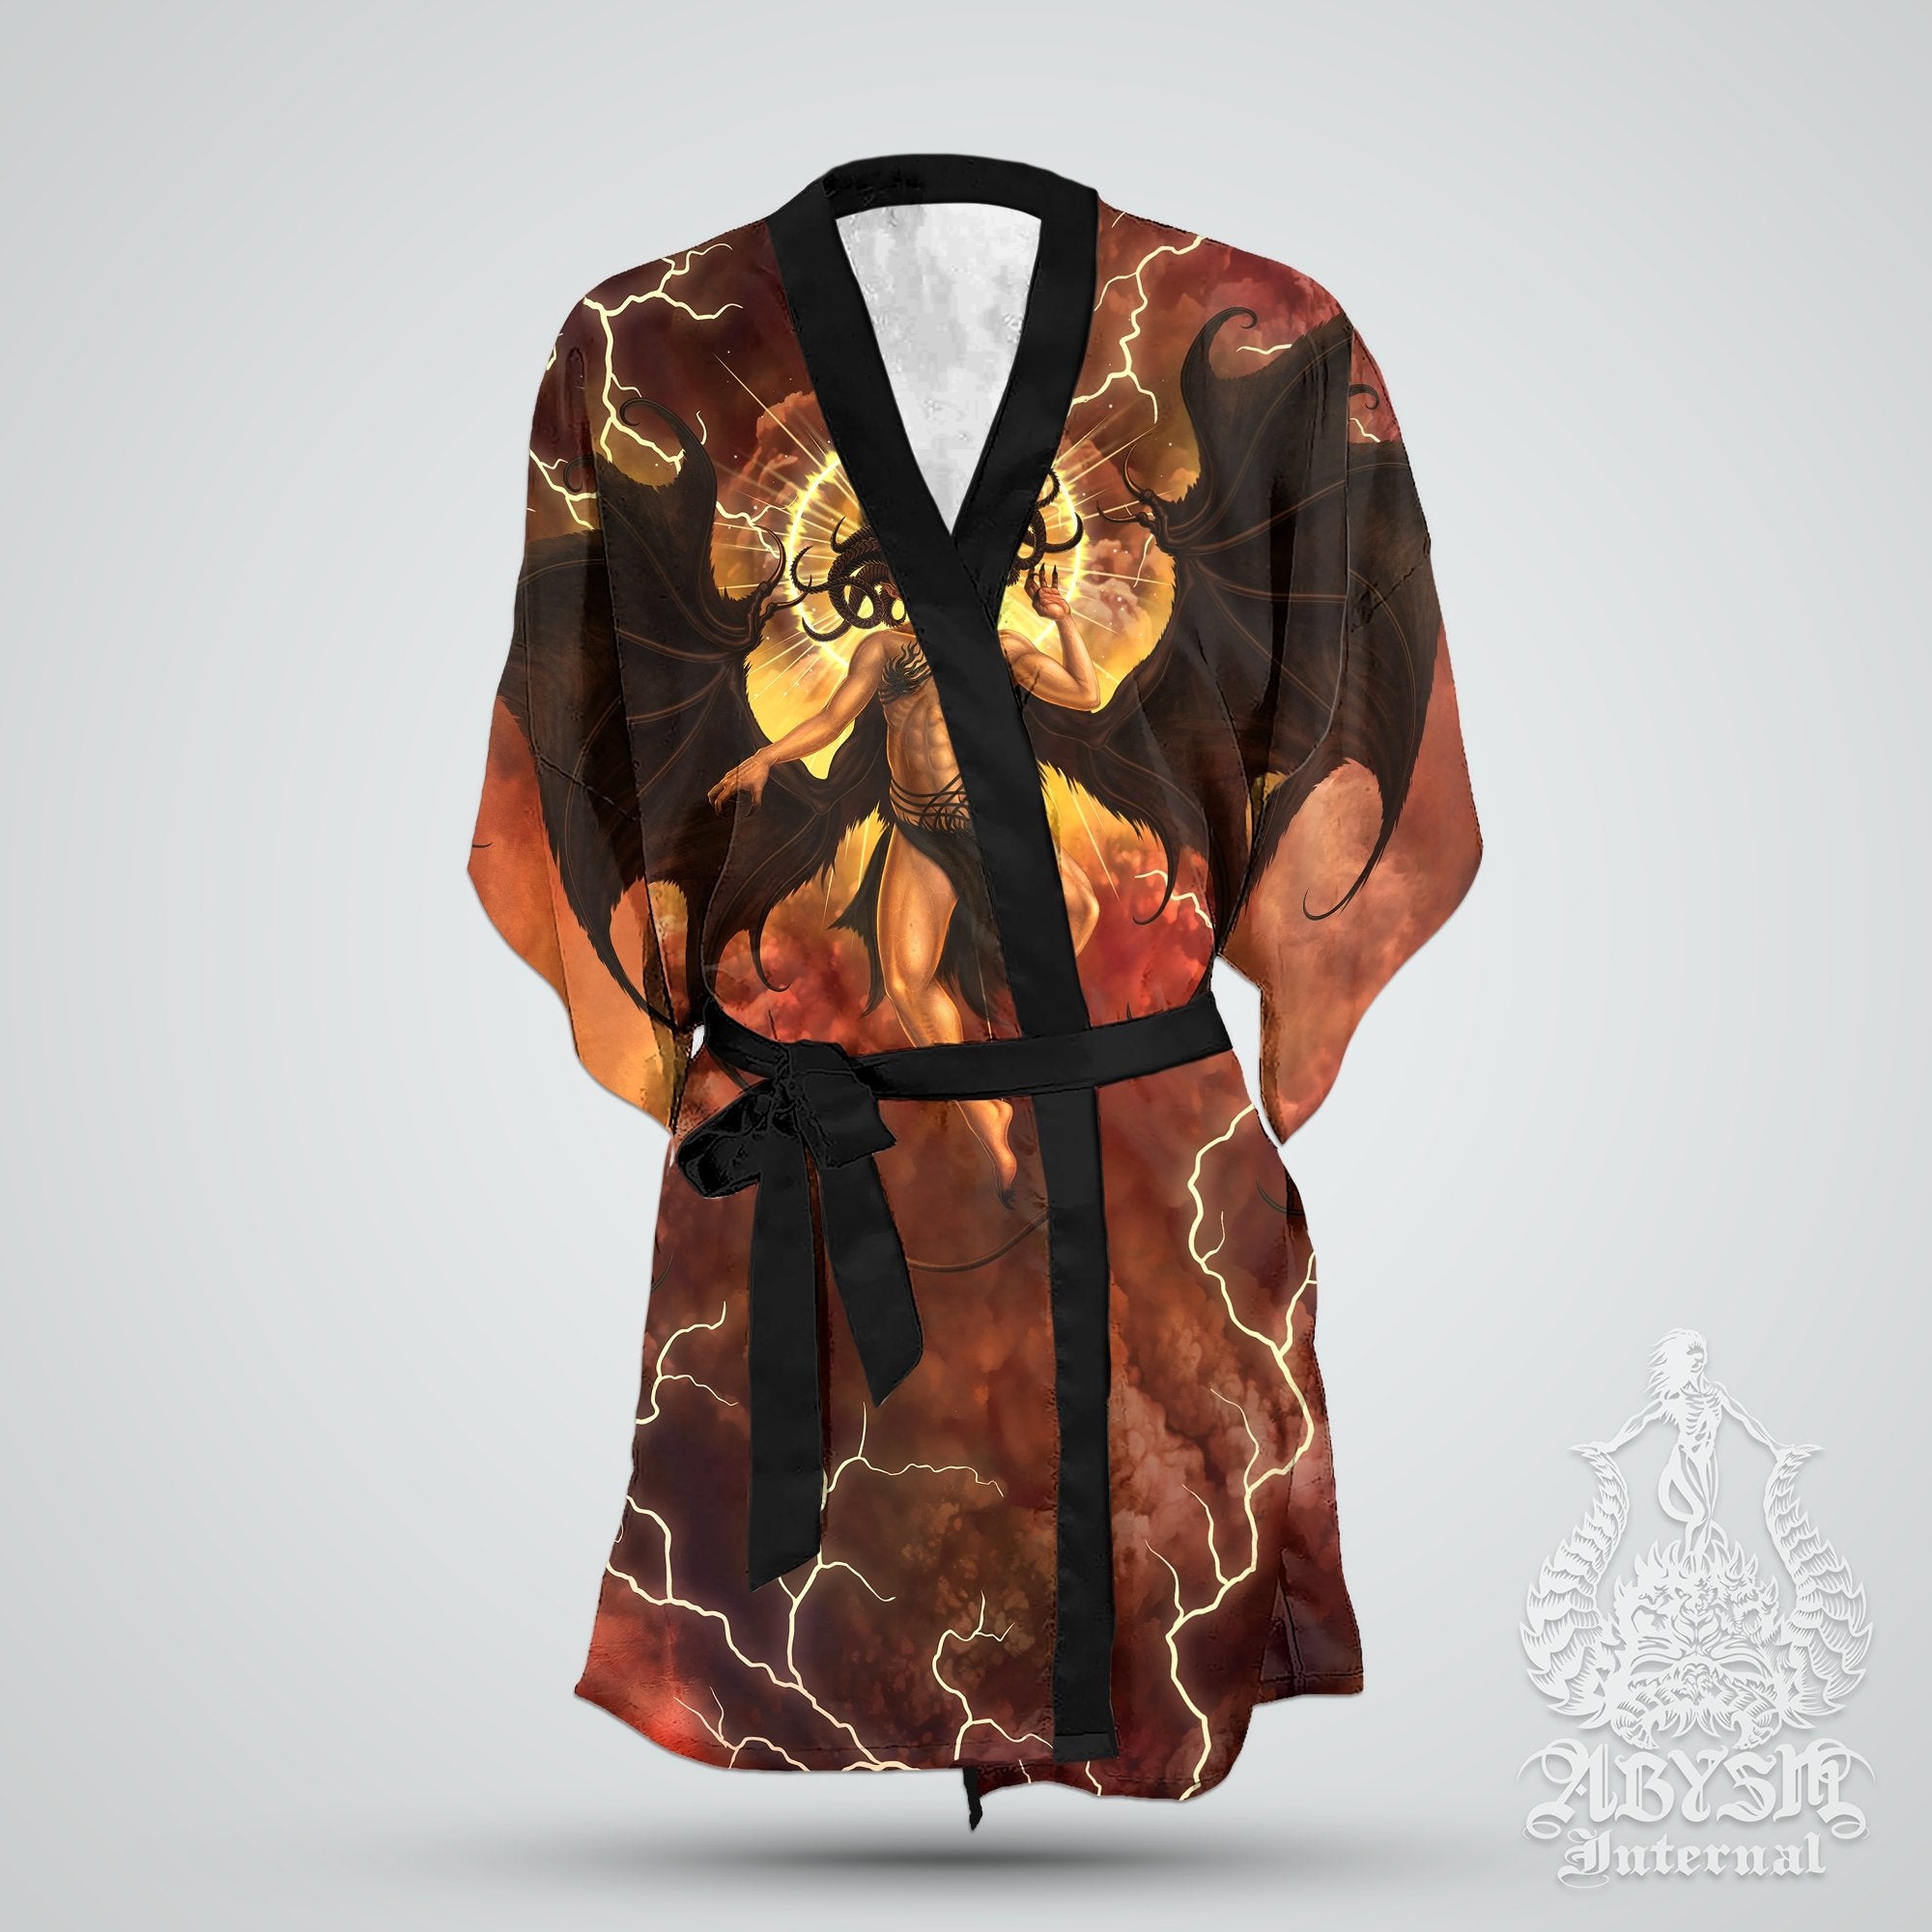 Lilith Cover Up, Beach Outfit, Party Kimono, Fantasy Summer Festival Robe, Indie and Alternative Clothing, Unisex - Satanic Demon - Abysm Internal